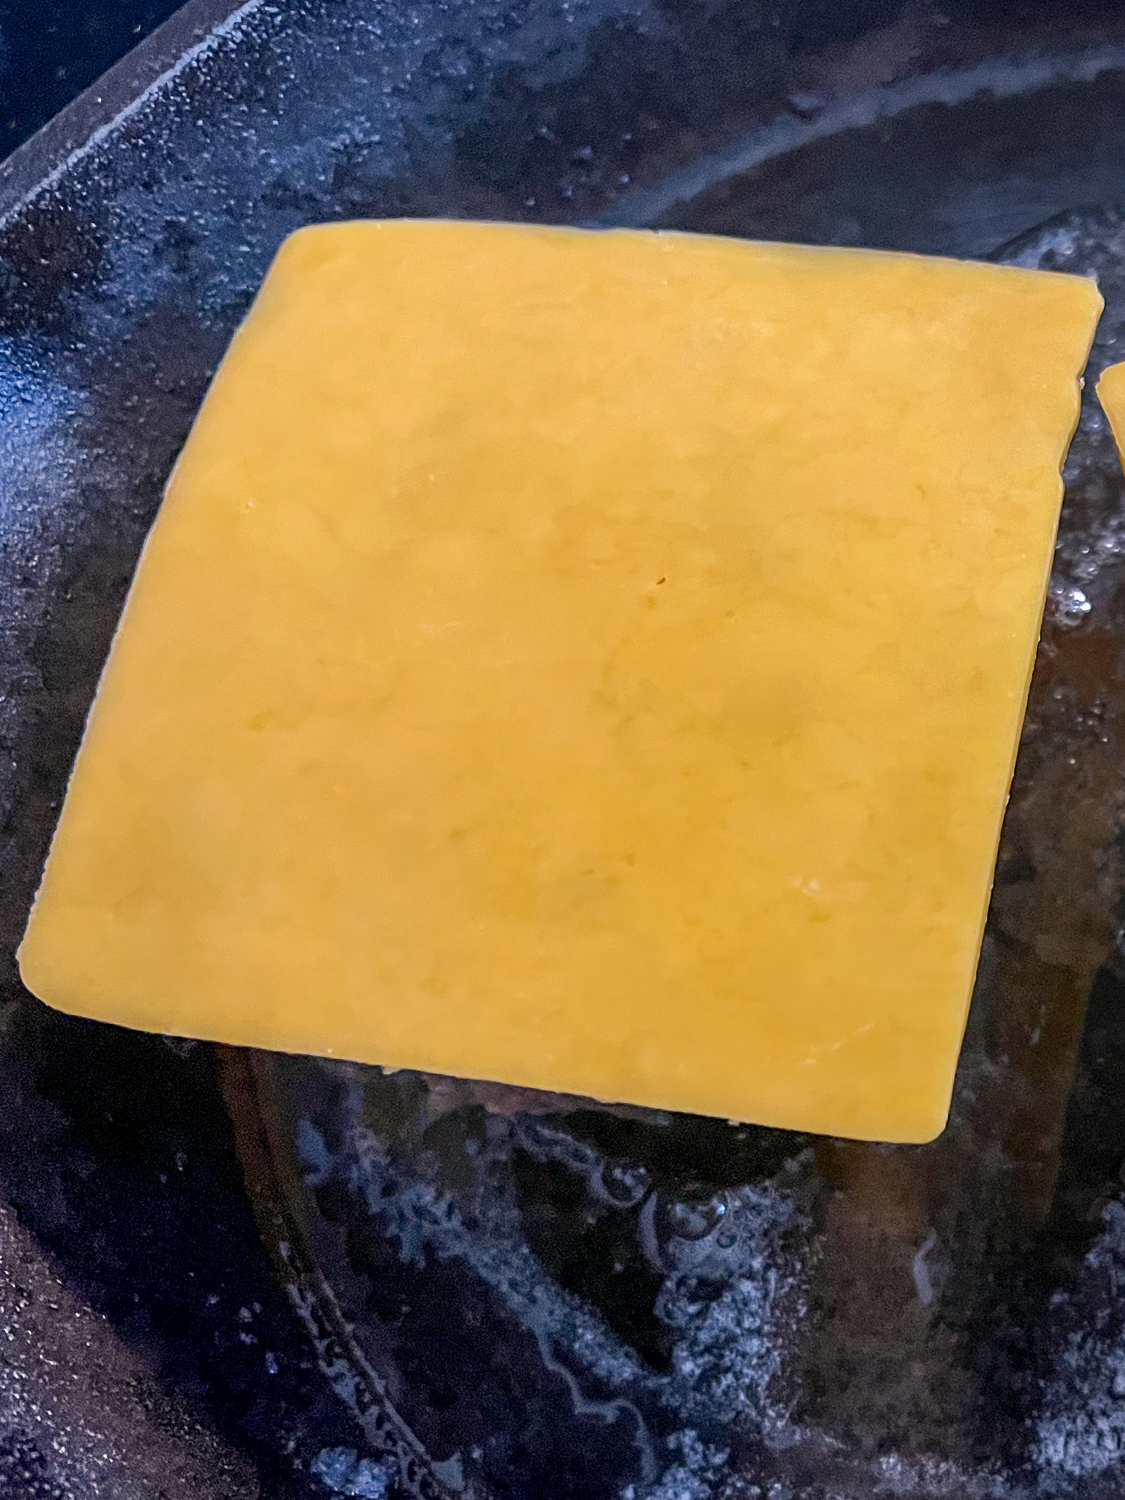 A slice of cheddar cheese placed atop a burger in a cast iron skillet.